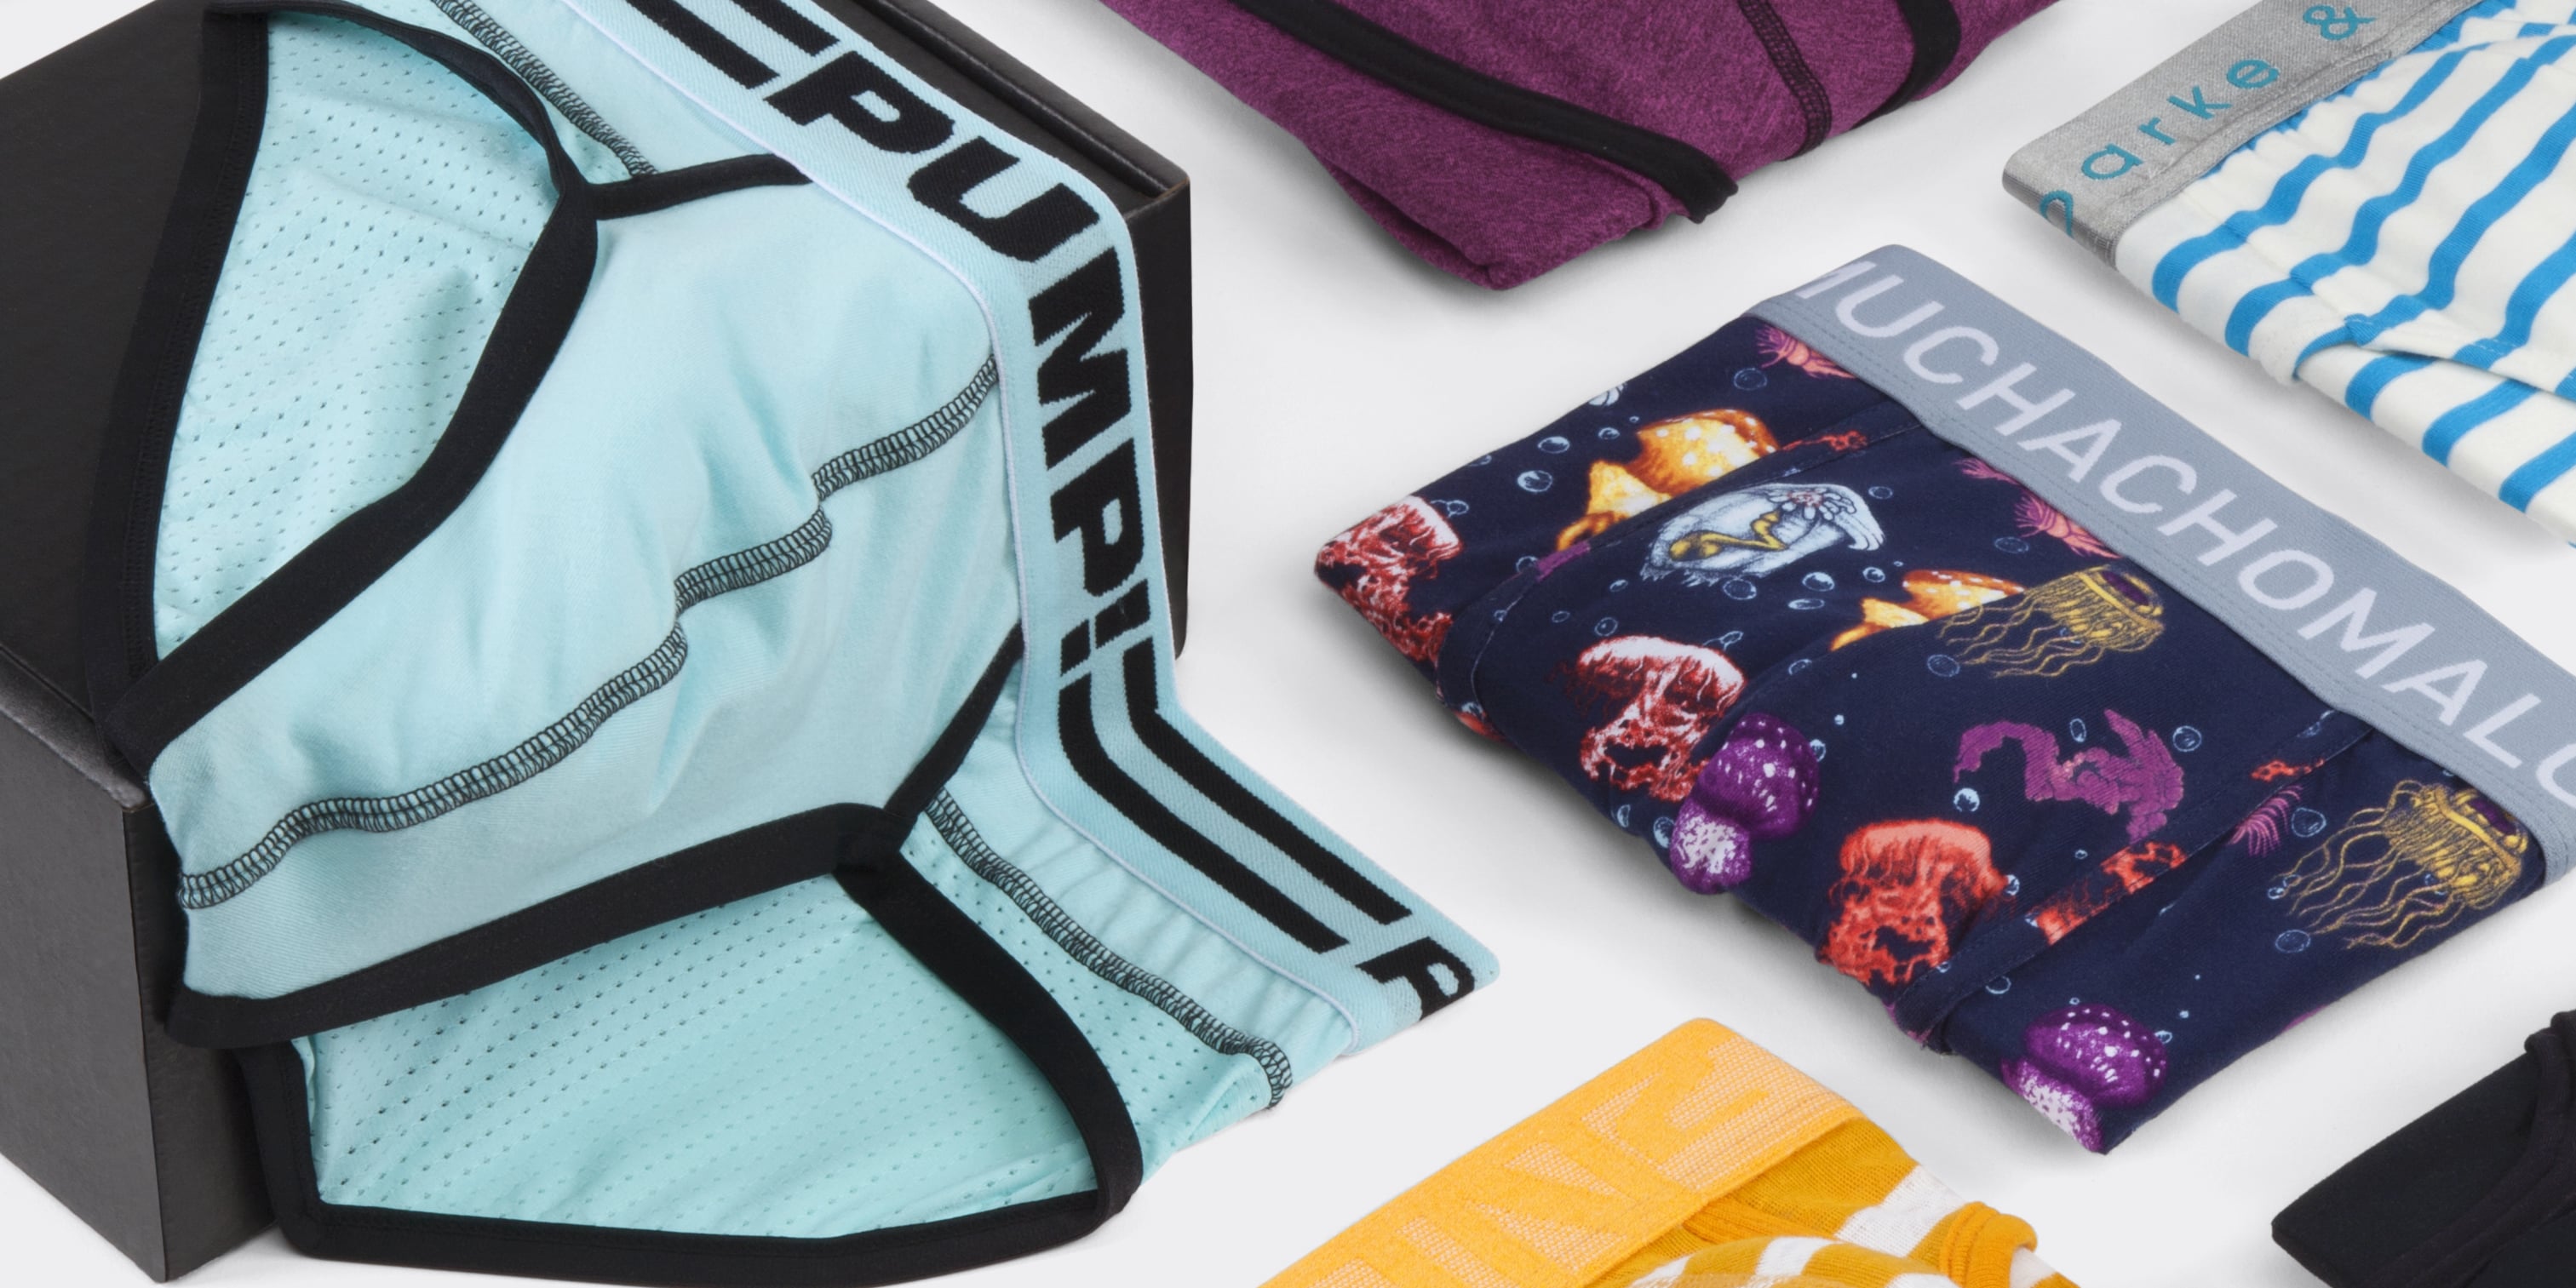 The Best Underwear Subscription Boxes For Men in 2020